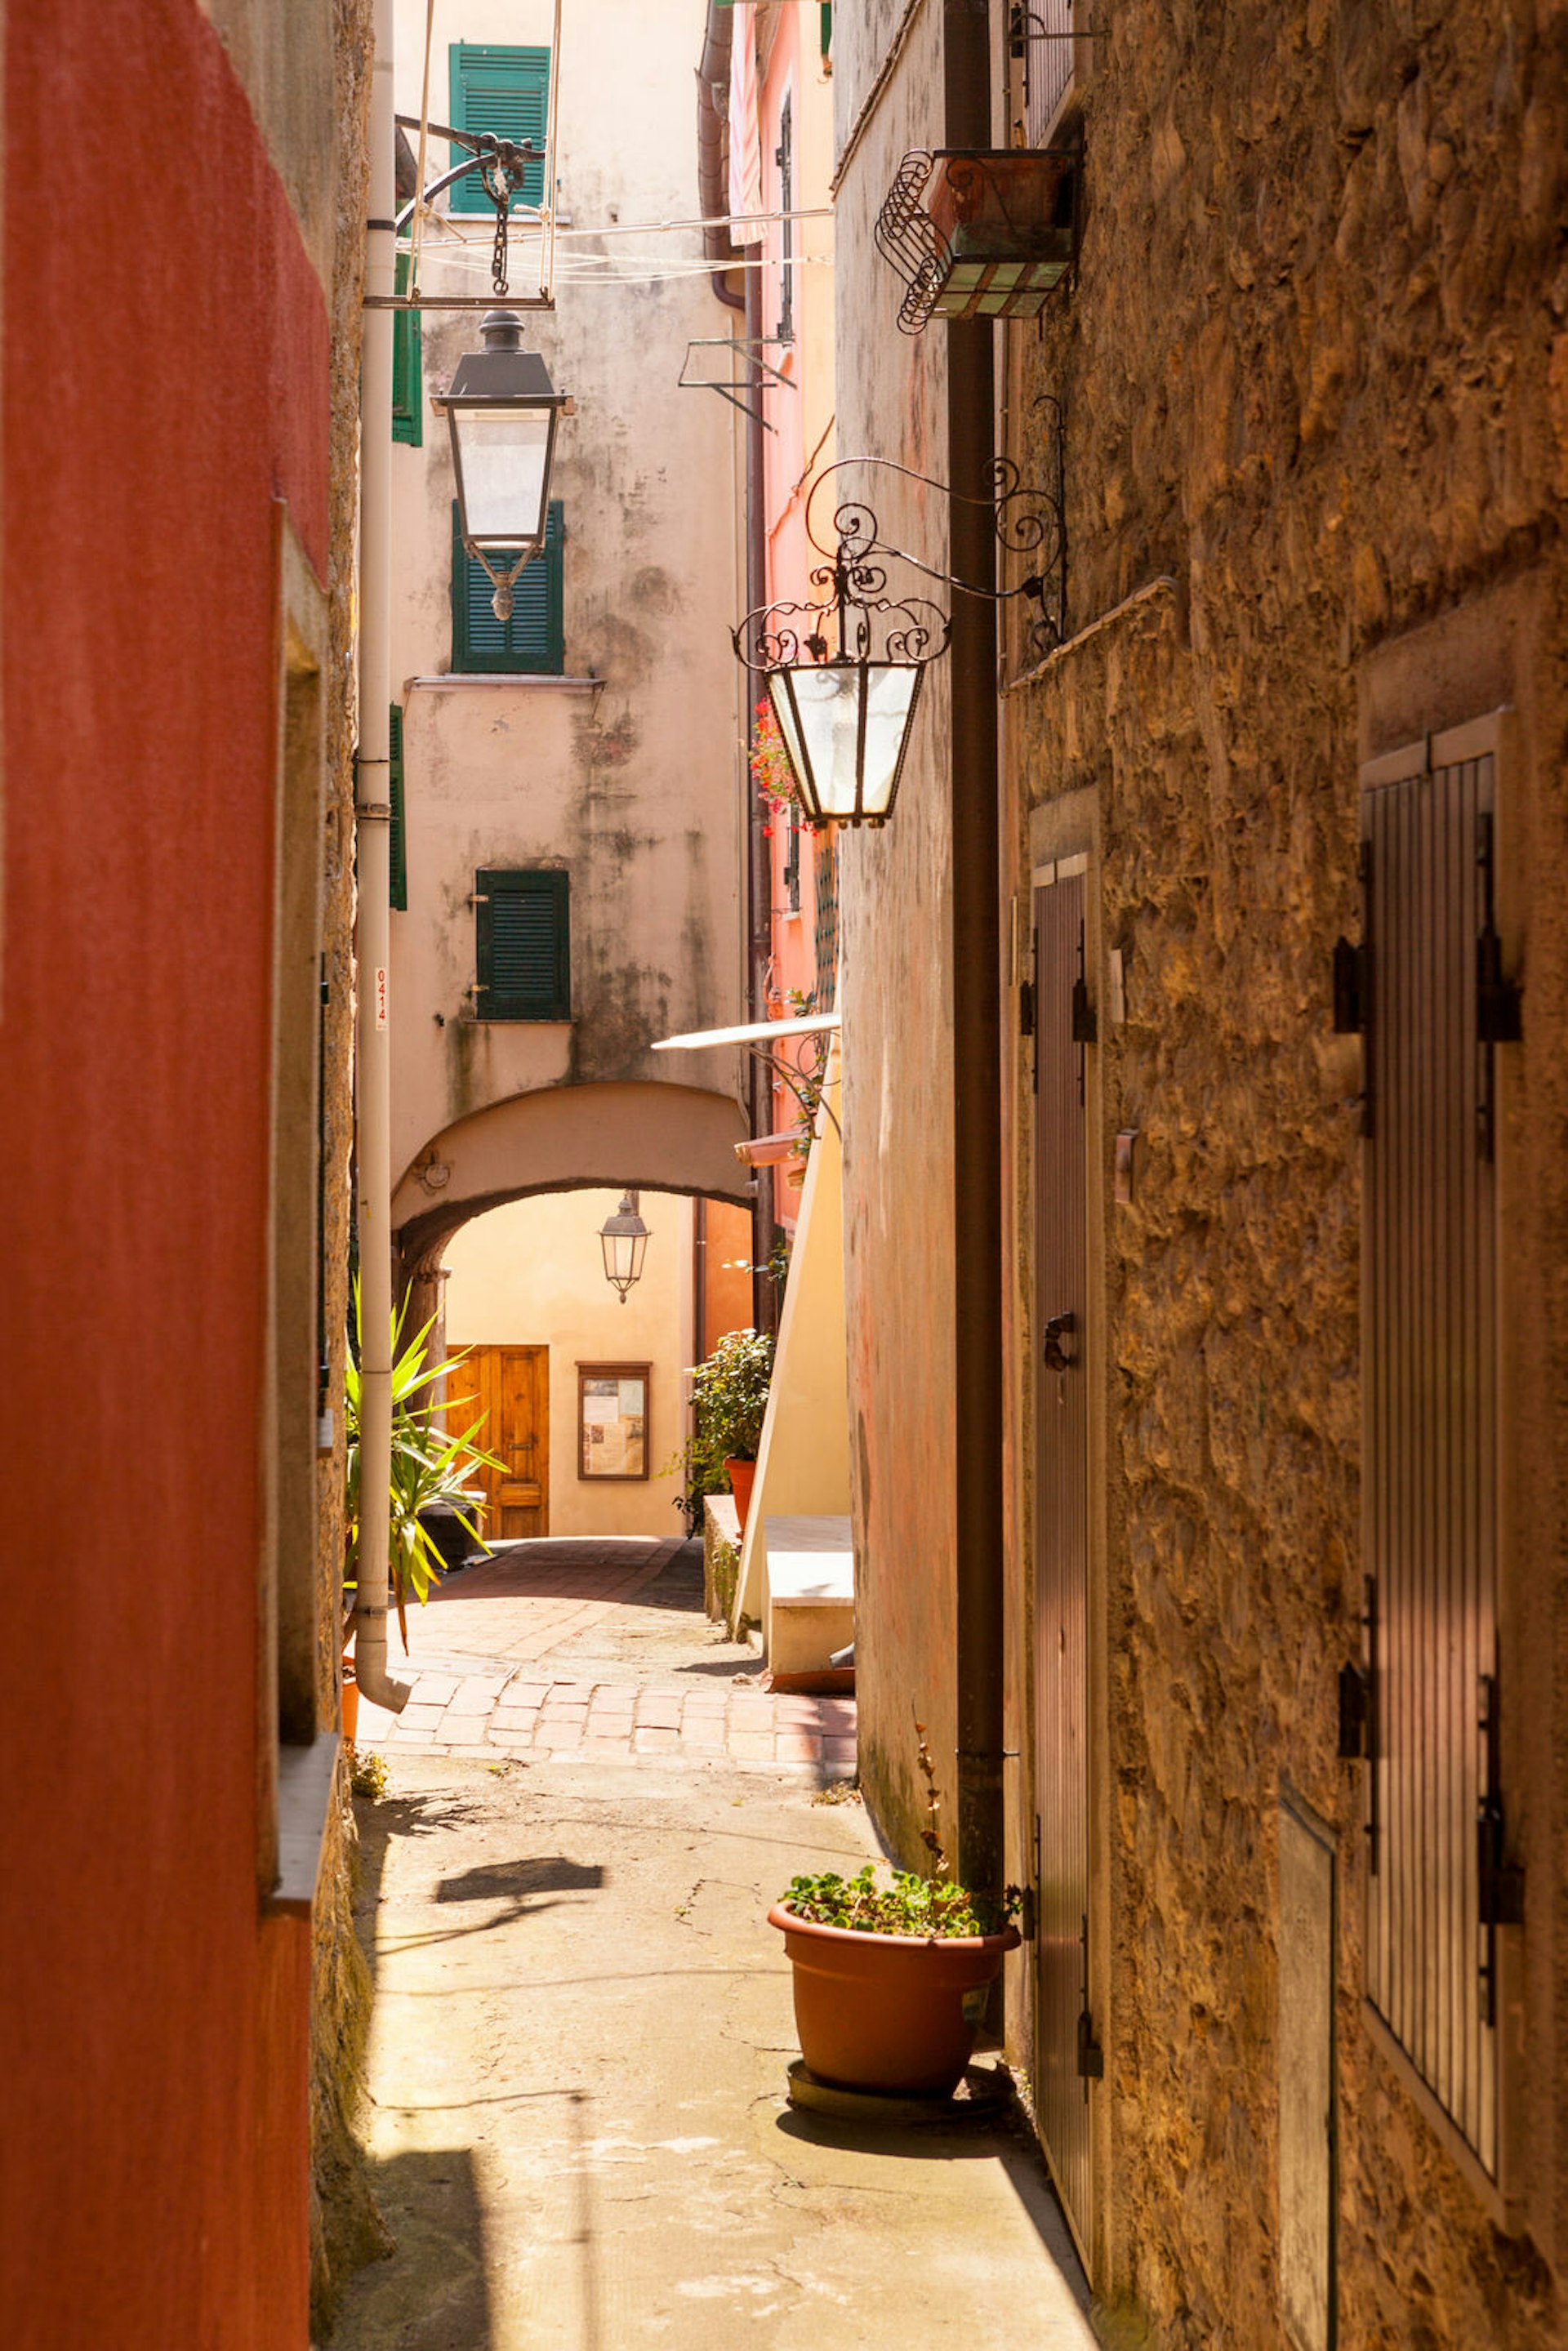 Looking down a narrow alleyway in Montemarcello, with glass lanterns and green shutters. There are some potted plants on the paved alley. The wall on the left is smooth and painted orange, the wall on the right is made from exposed, beige stones. 